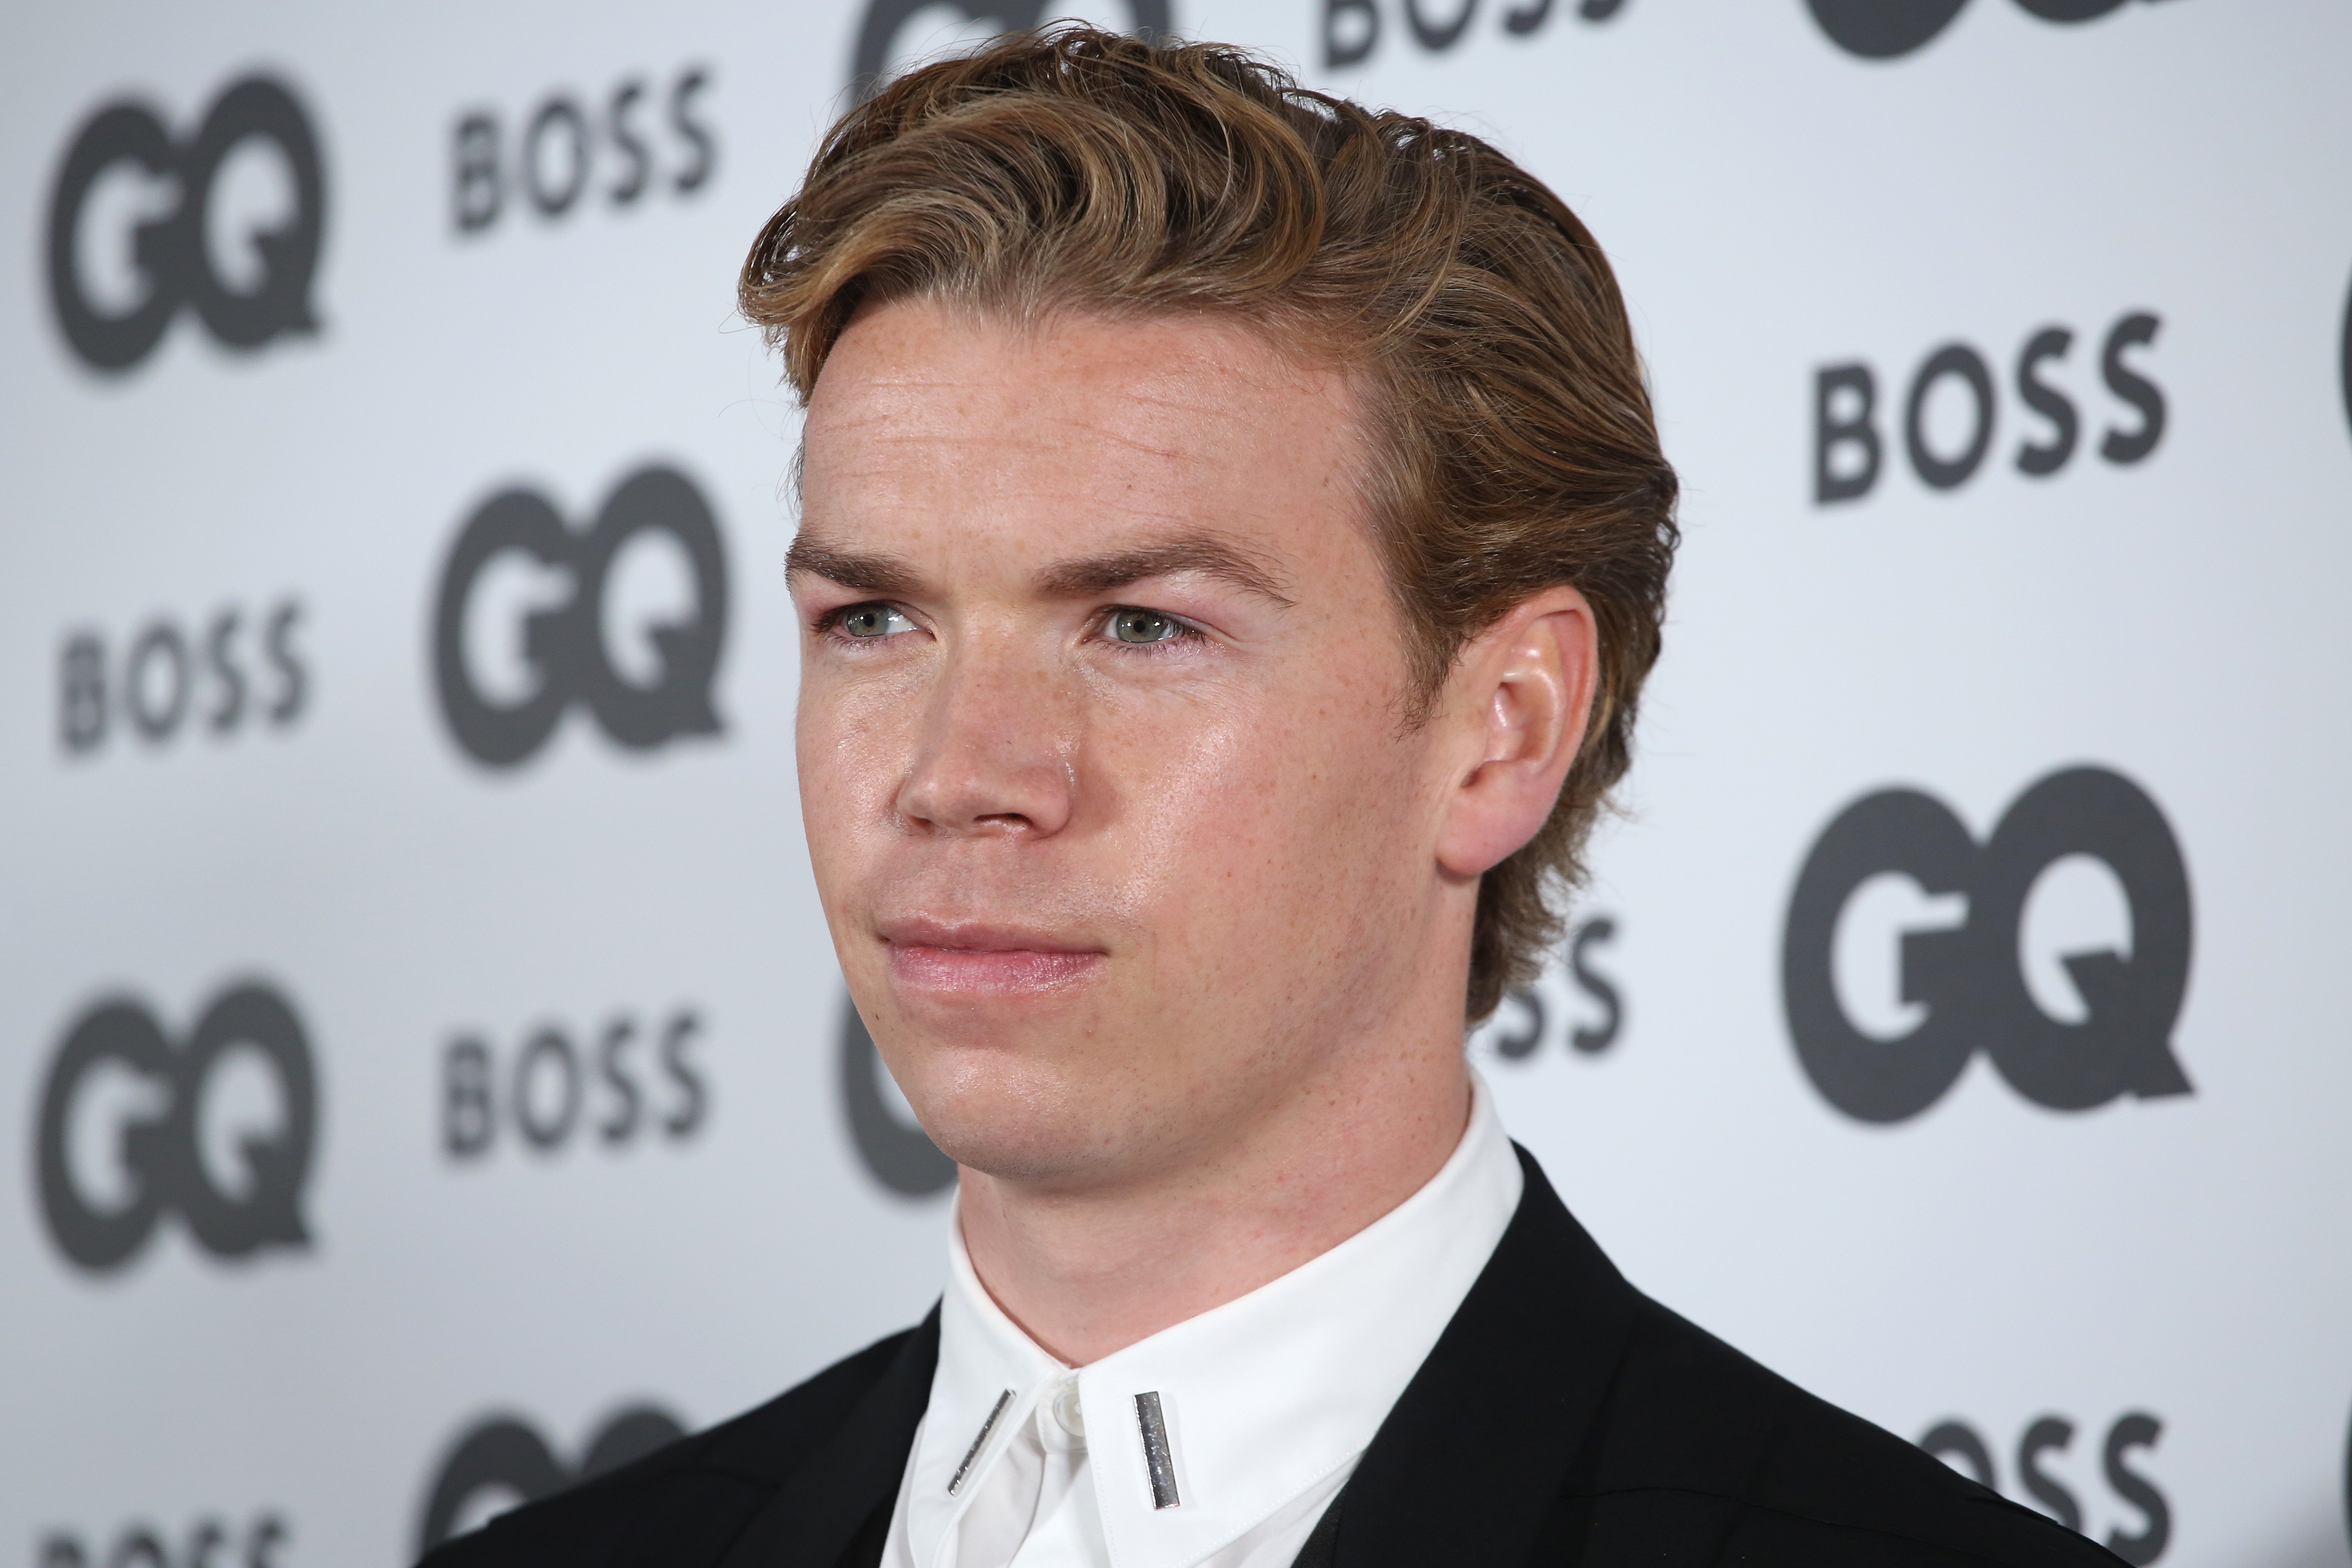 Will Poulter at the GQ Men Of The Year Awards 2022 in London, England. | Source: Getty Images